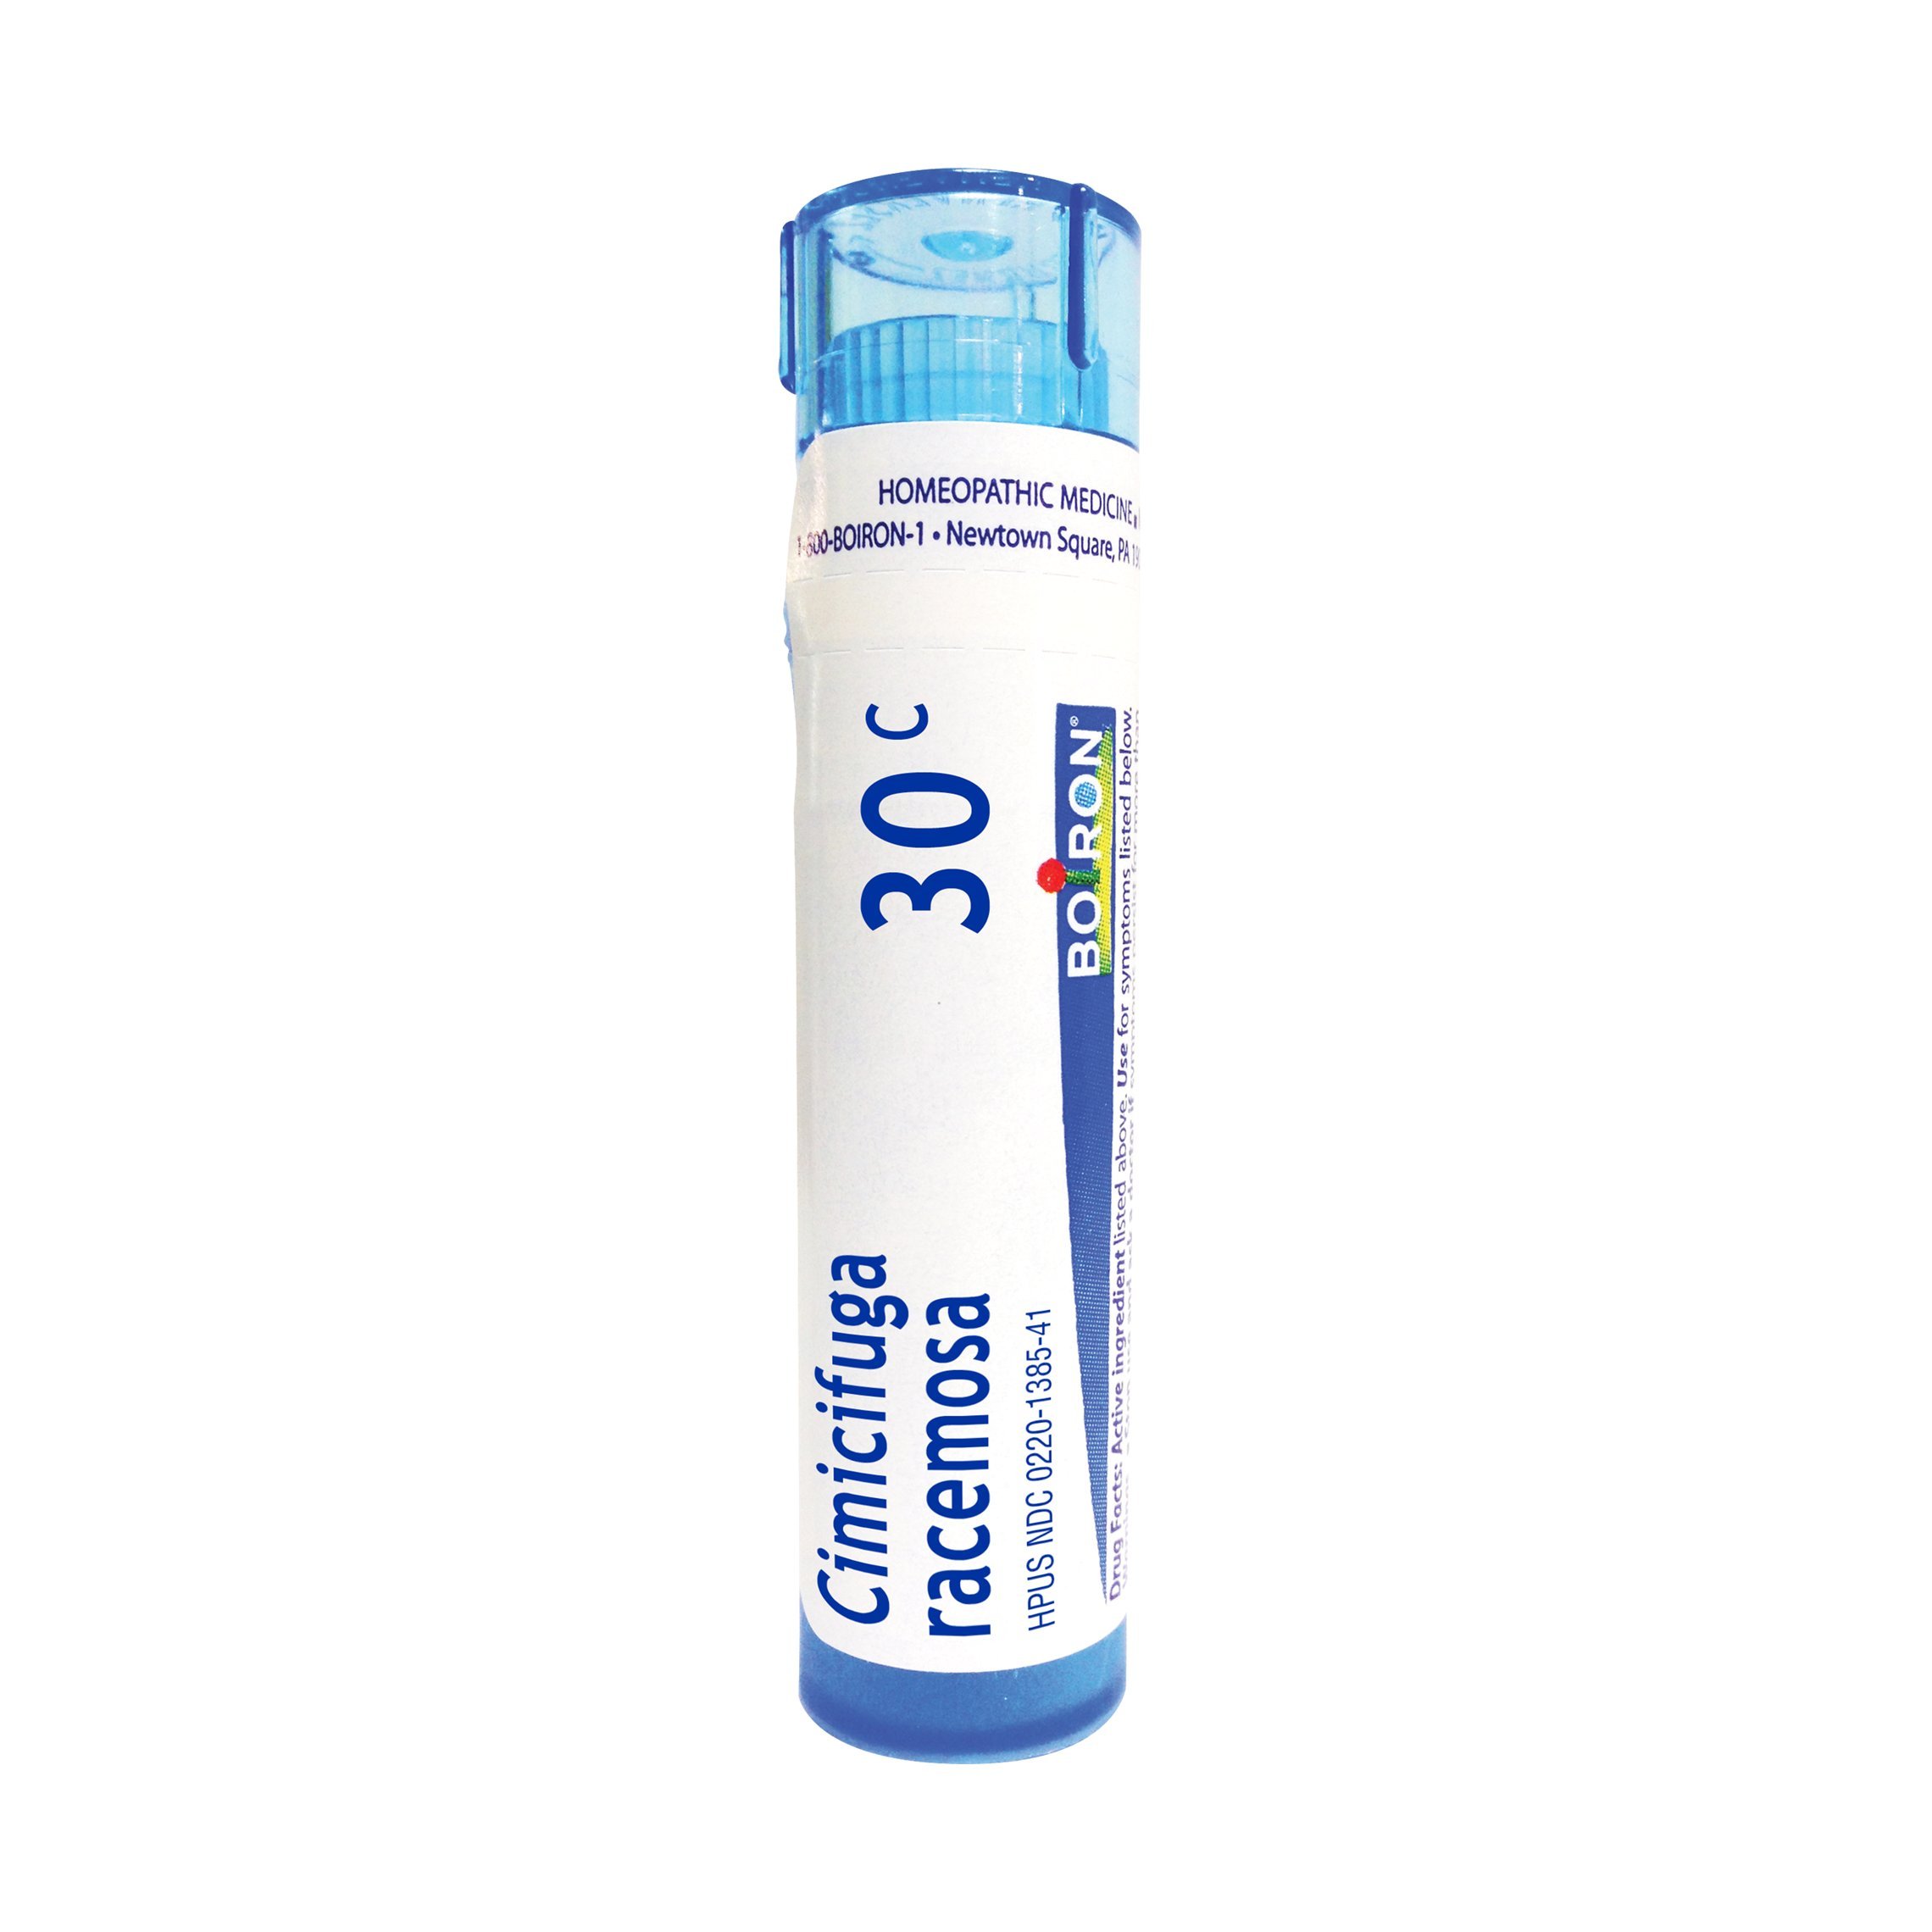 Boiron Cimicifuga Racemosa 30C Homeopathic Medicine for Menstrual cramps improved by lying down